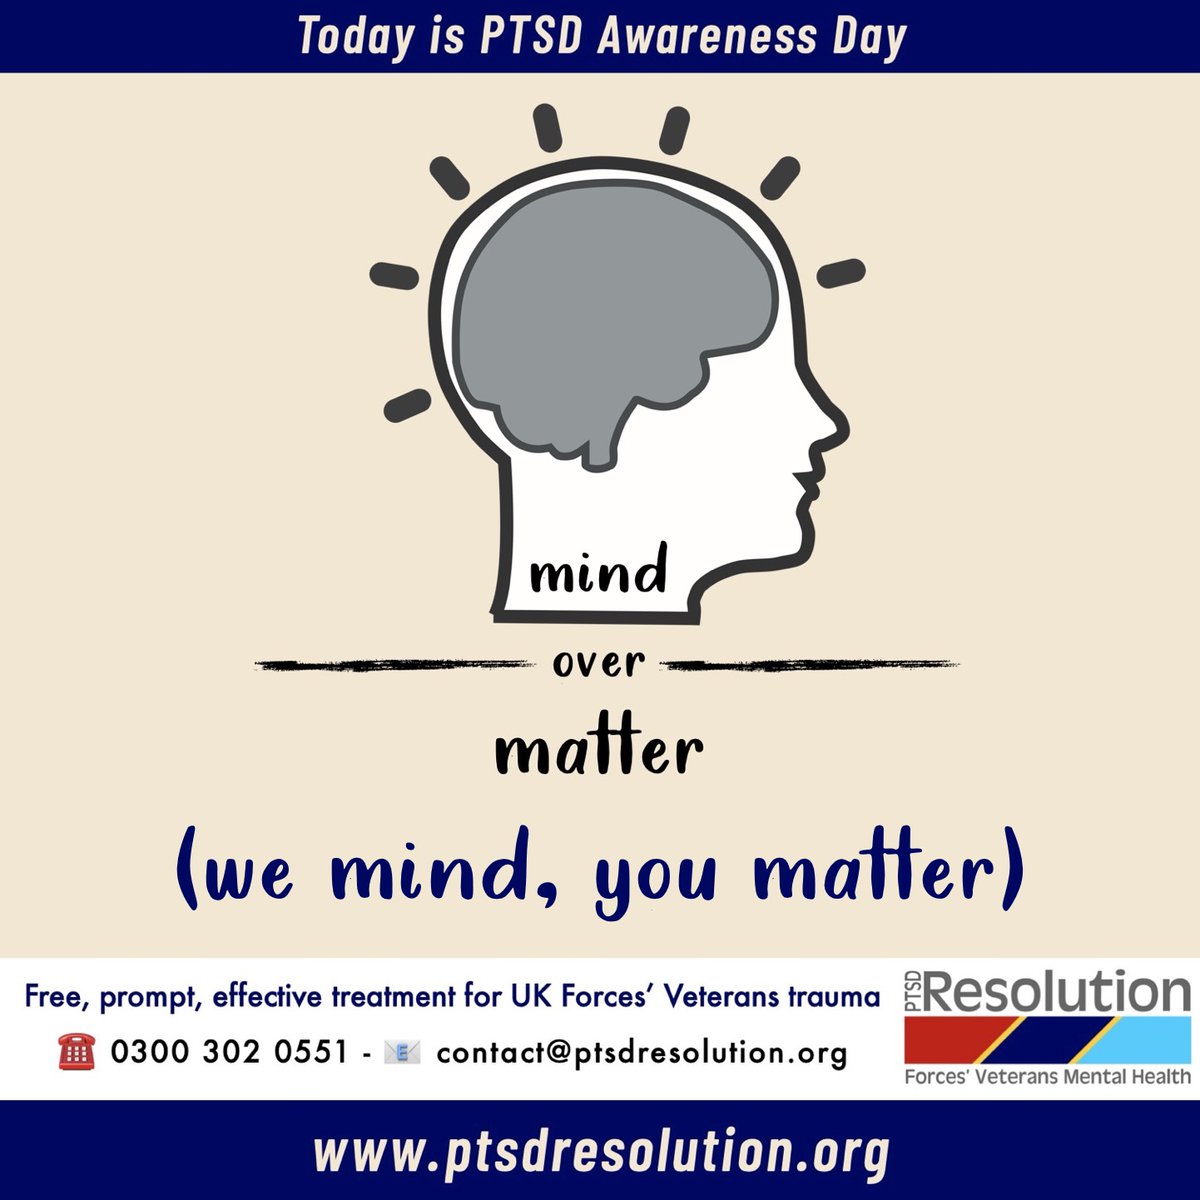 Today is #PTSDAwarenessDay & we are calling out to UK Veterans, Reservists & families: 

📢 There is no need to continue suffering the effects of Post Traumatic Stress

Call #PTSDResolution on 0300 302 0551 or email contact@ptsdresolution.org

We mind, you matter.

#MentalHealth